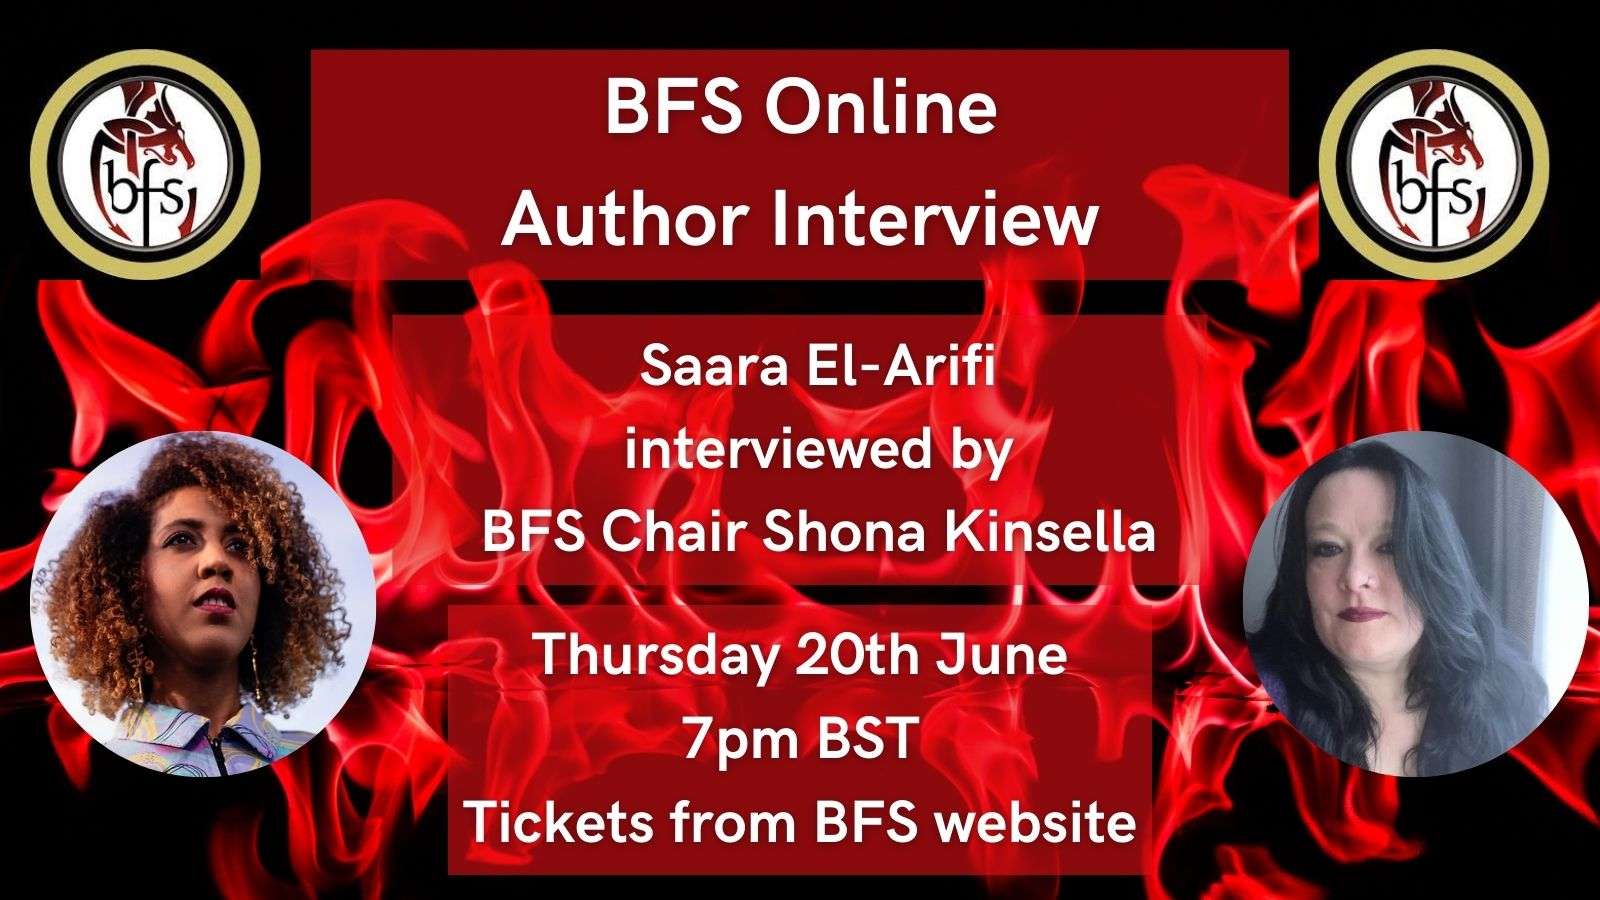 Shown is a graphic that has a black background with red flames. On the top right and left is the BFS logo, a red and black dragon design curling around the letters ‘BFS’. Left is a photo of Saara-El-Arifi, who has curly brown hair with highlighted sections and is wearing a blue shirt with purple and yellow patterns. Top right is Shona Kinsella, who has long, black, wavy hair that hangs over right side of her face. At the top are lines of black text, saying 'BFS Online, Author Interview.’ Below are lines of black text, saying ‘Saara El-Arifi interviewed by BFS Chair Shona Kinsella.’ At the bottom are lines of black text saying ‘Thursday 20th June, 7pm BST. Tickets from BFS website.’